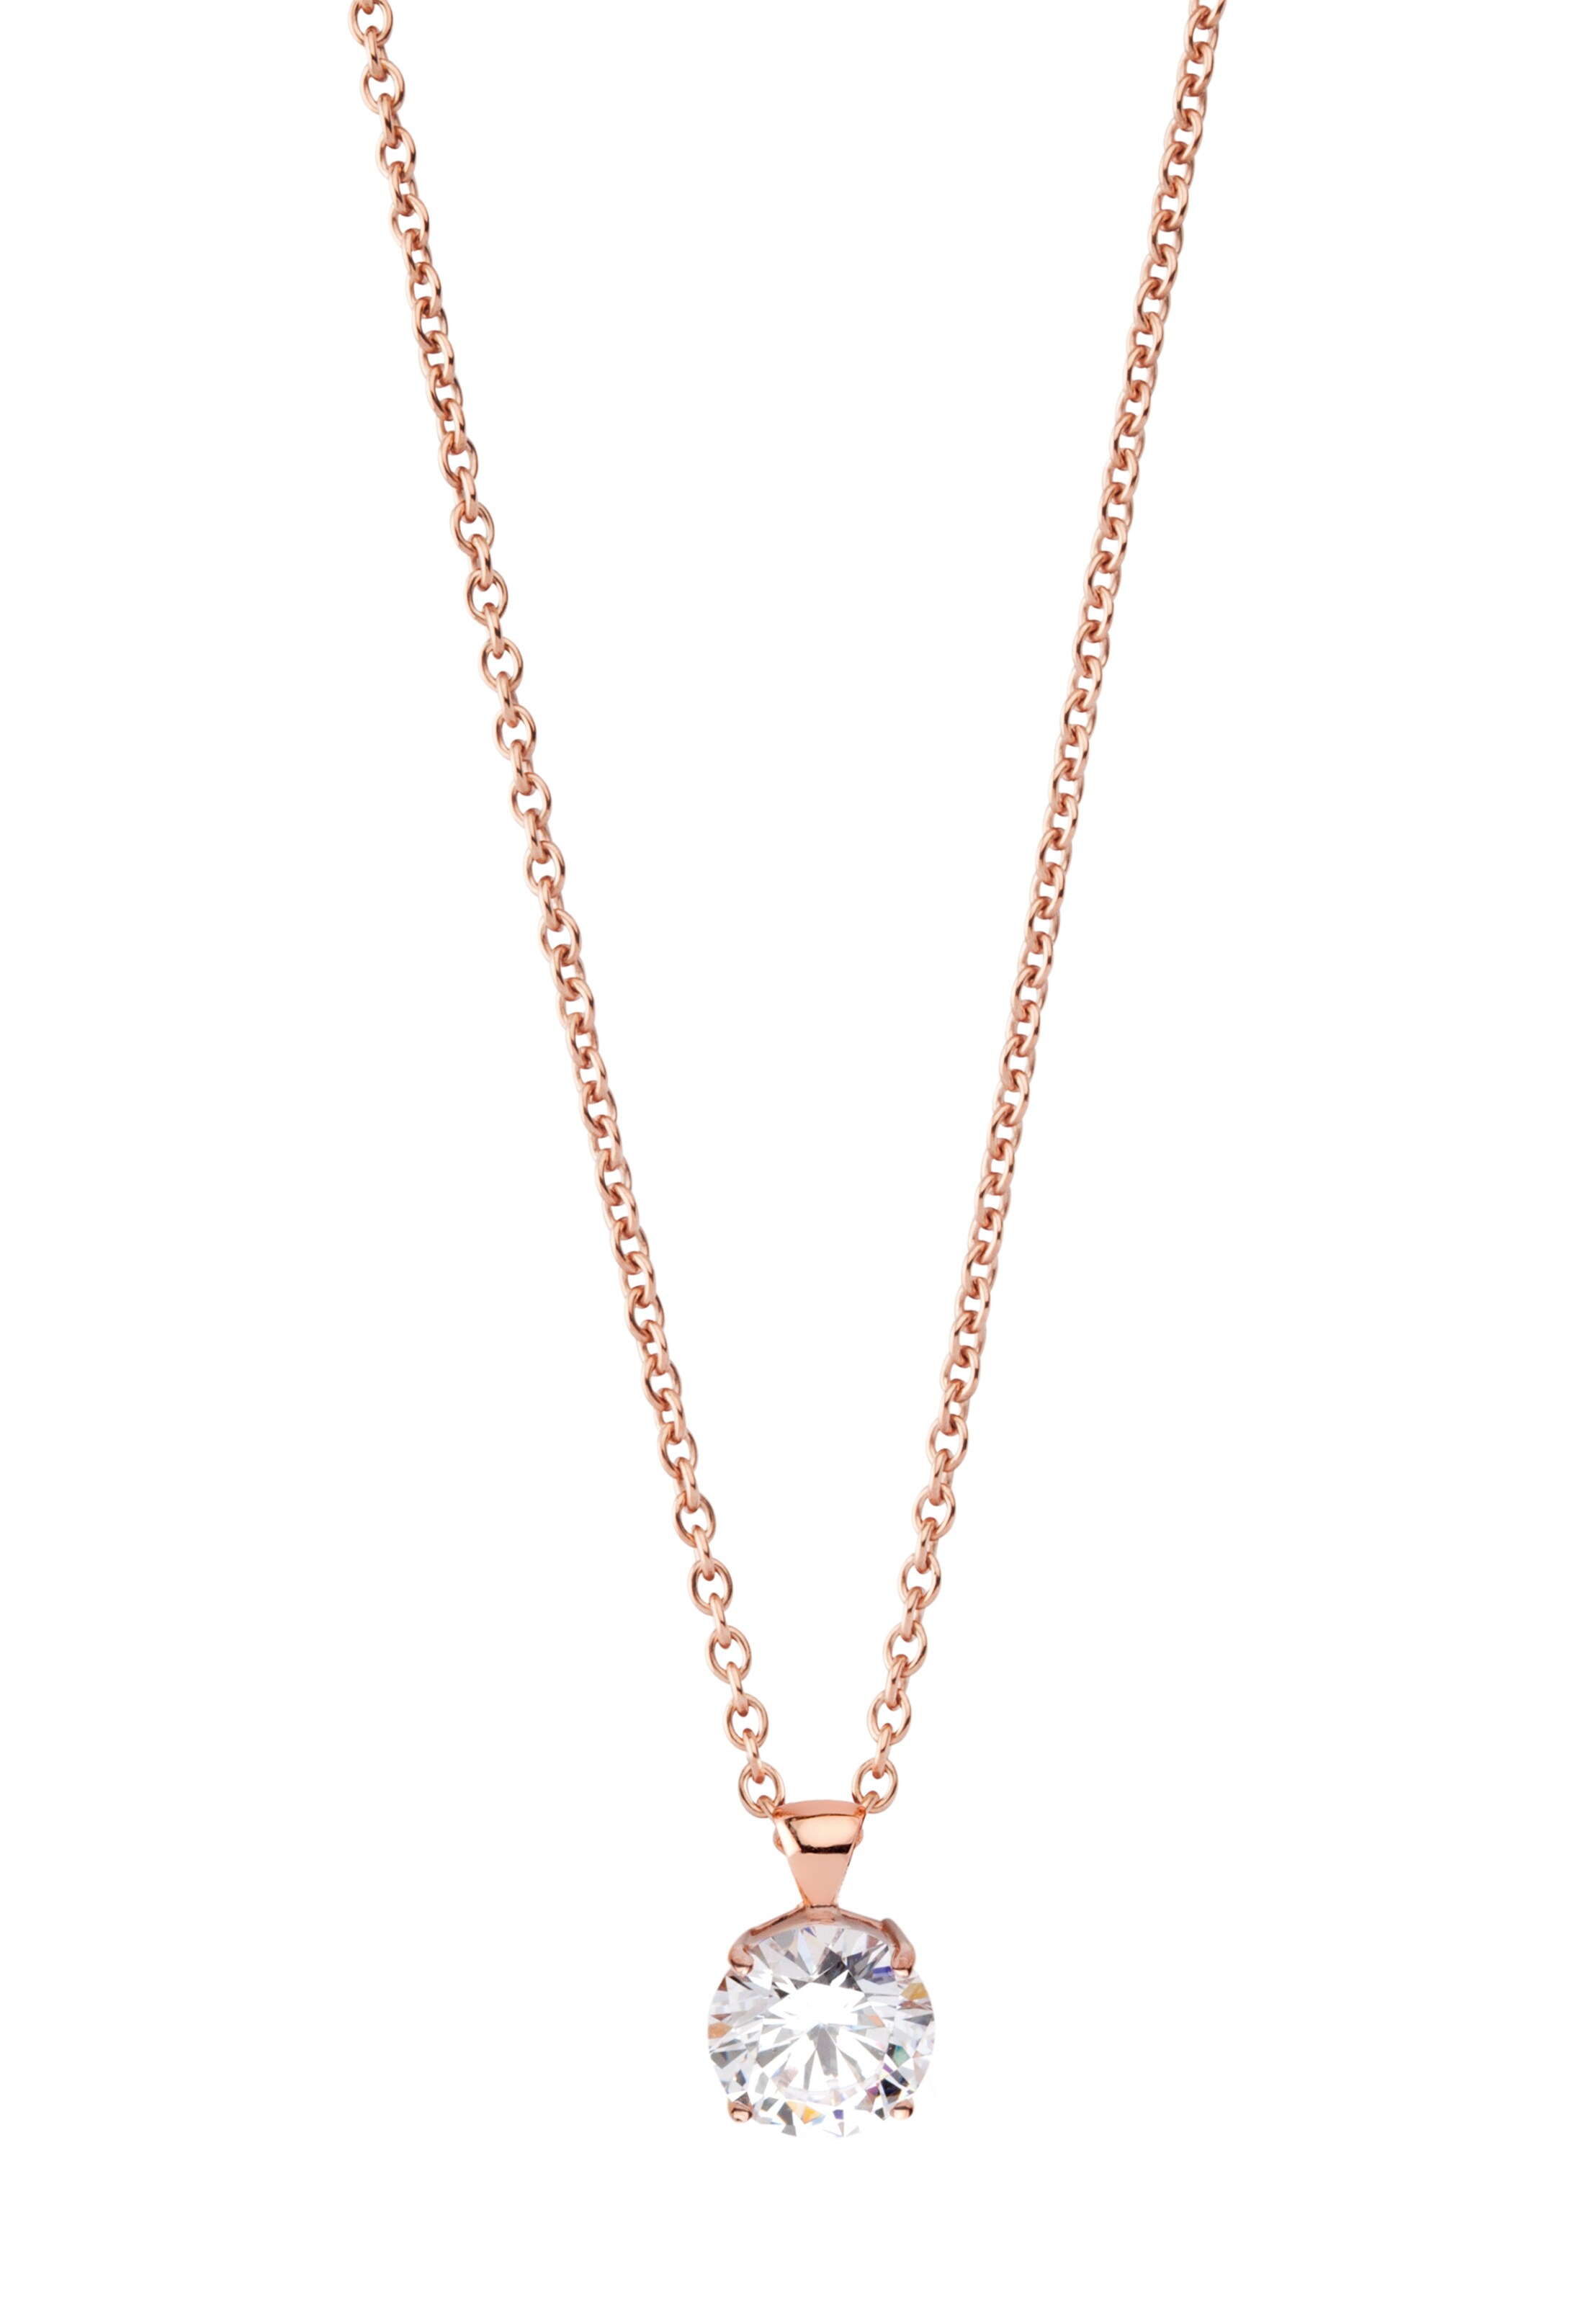 Nana Kay Kette Solitaire in Rosegold 